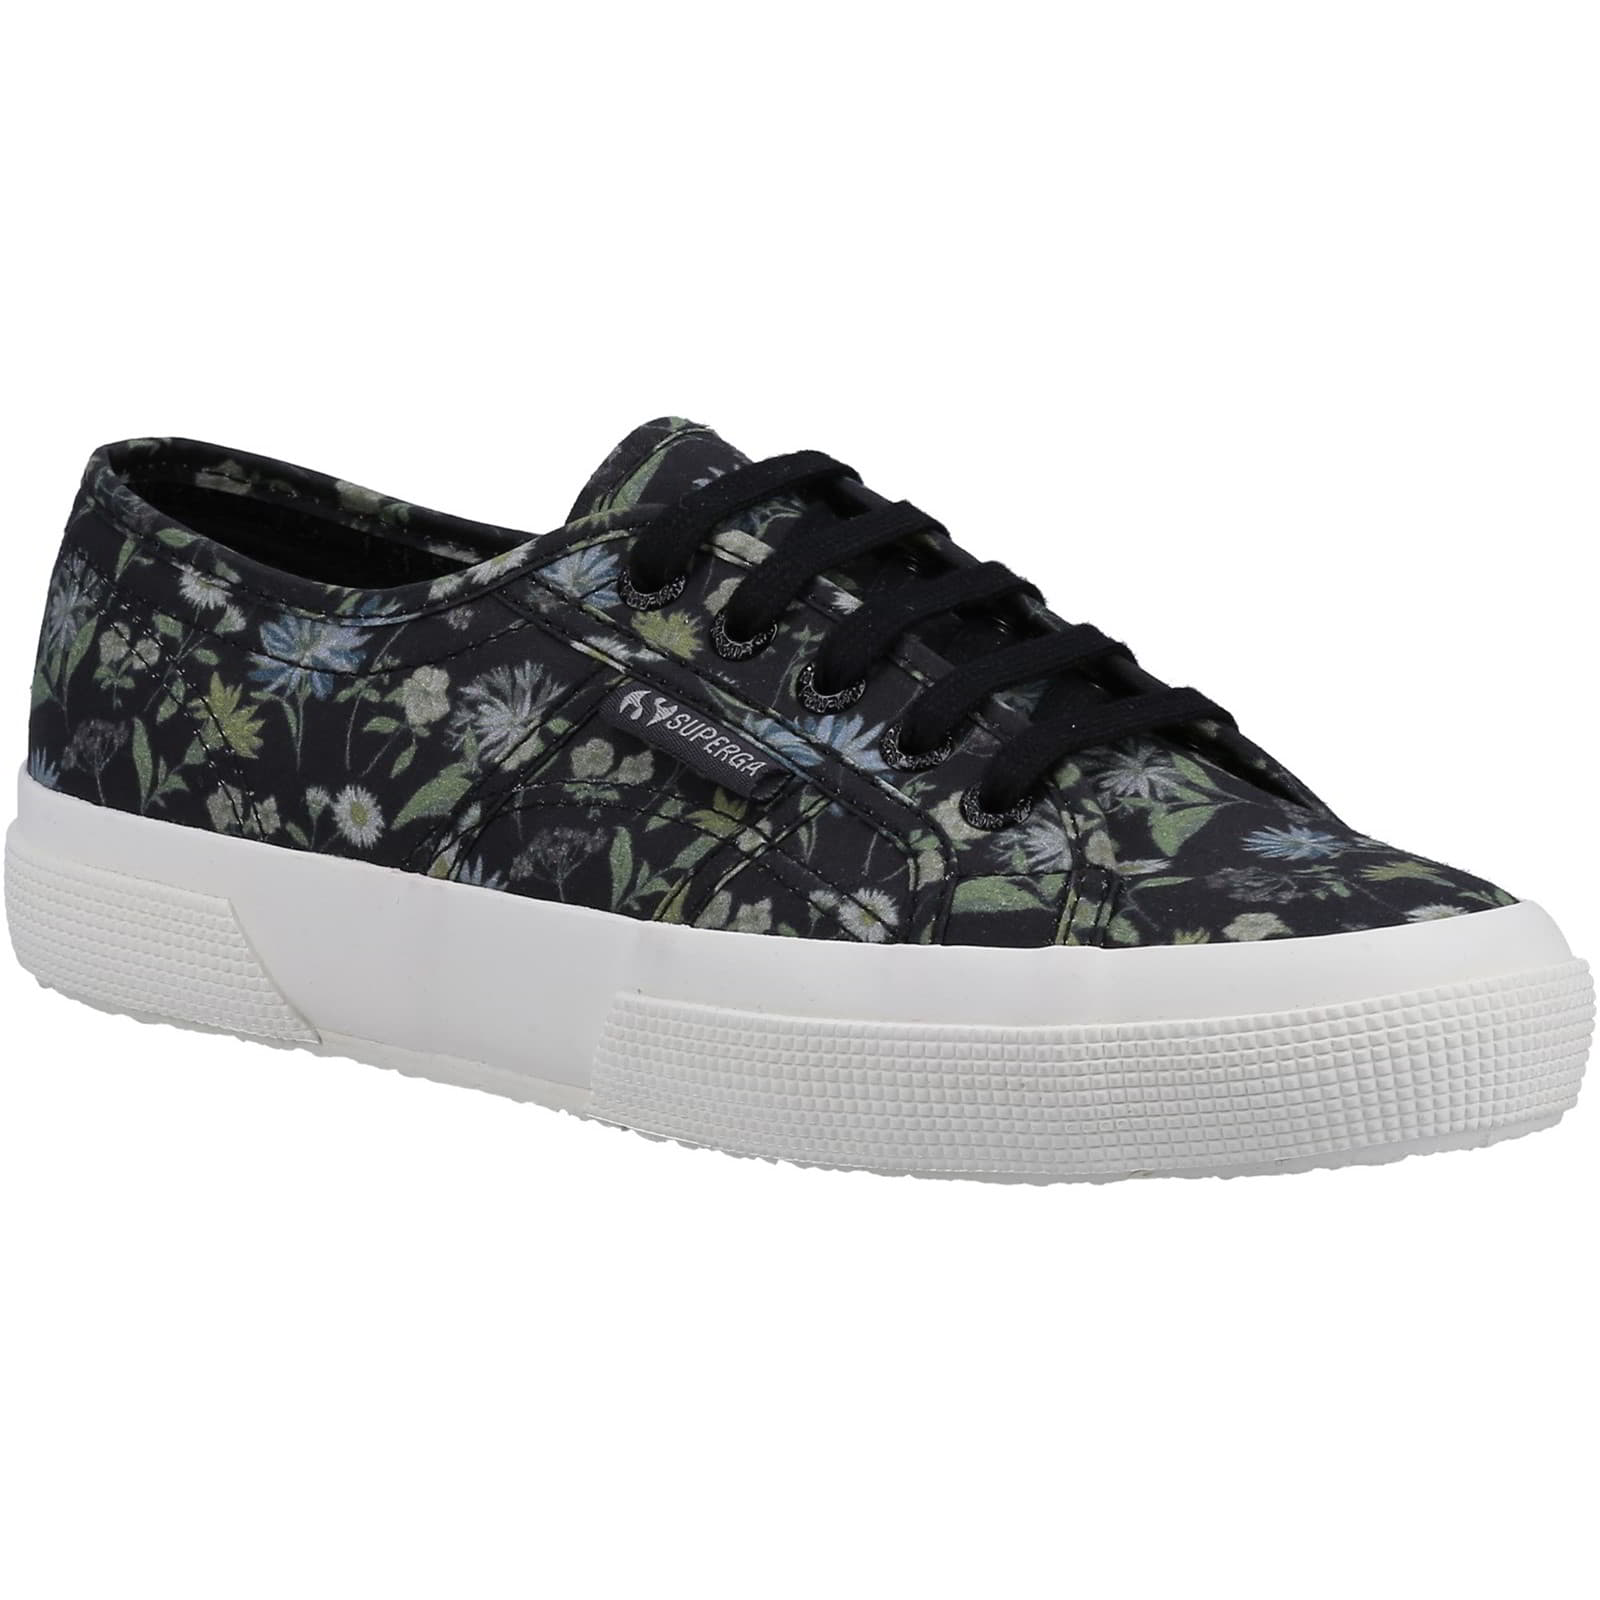 Superga Women's 2750 Floral Print Lace Up Trainers Shoes - UK 3